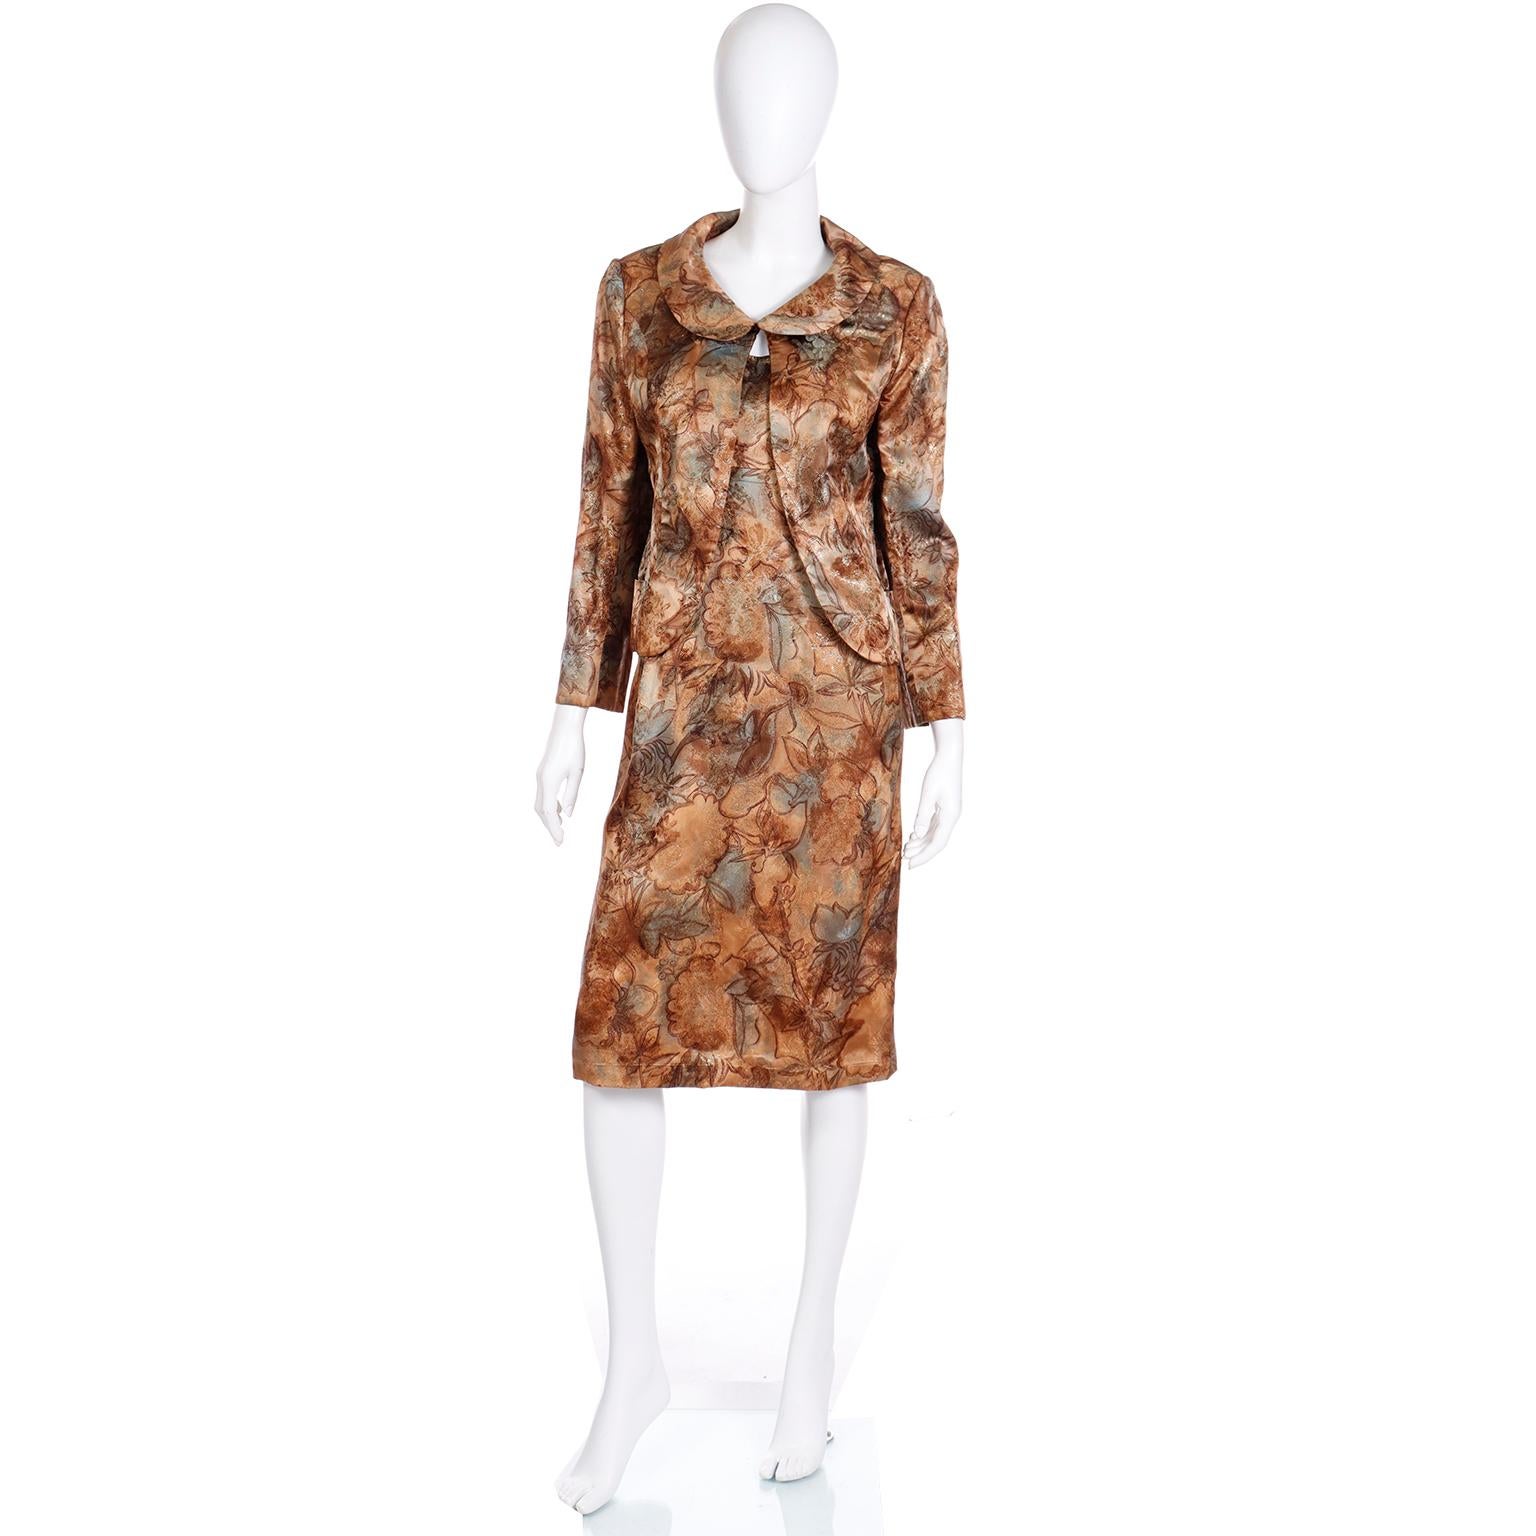 This is such a pretty vintage 1960's  Helen Rose silk satin, abstract watercolor floral print dress with a matching jacket. The dress is in shades of copper, brown, and dusty blue with gold metallic thread details, The jacket has shoulder pads, a